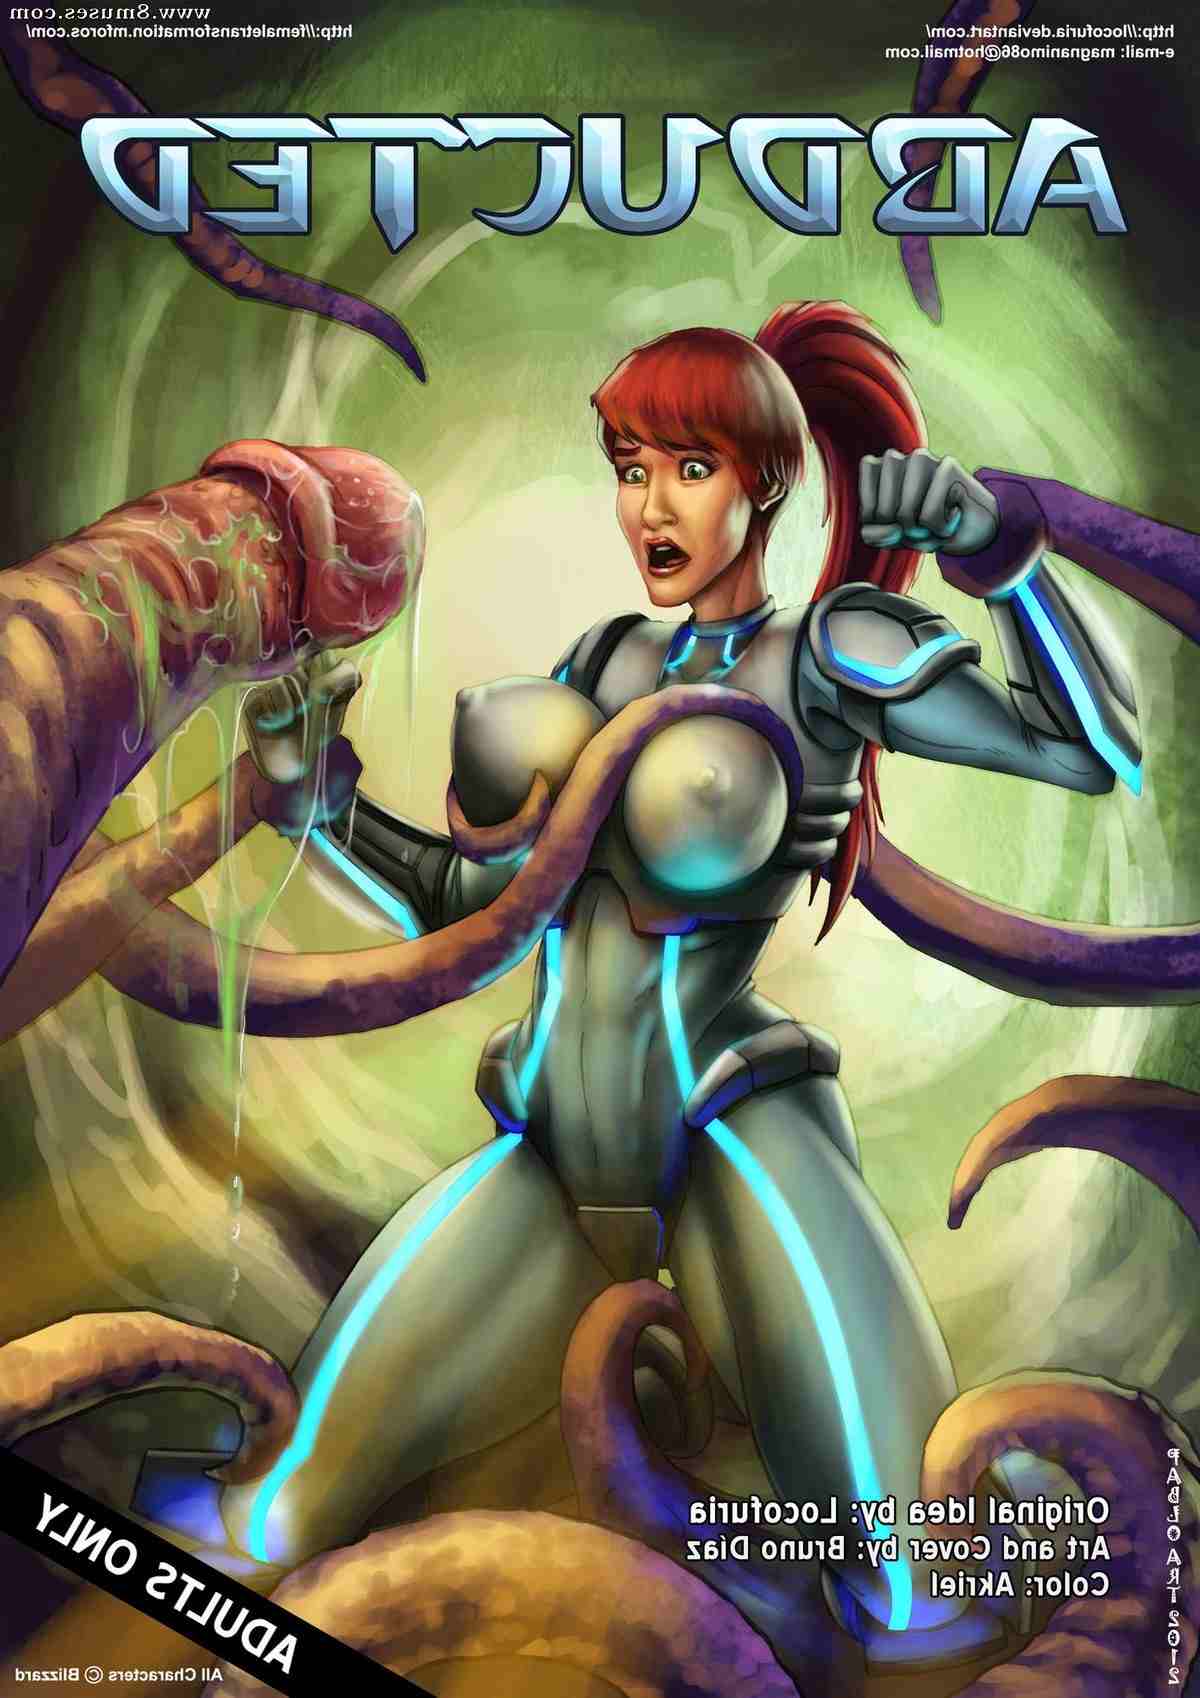 Locofuria-Comics/StarCraft-Abducted StarCraft_Abducted__8muses_-_Sex_and_Porn_Comics.jpg